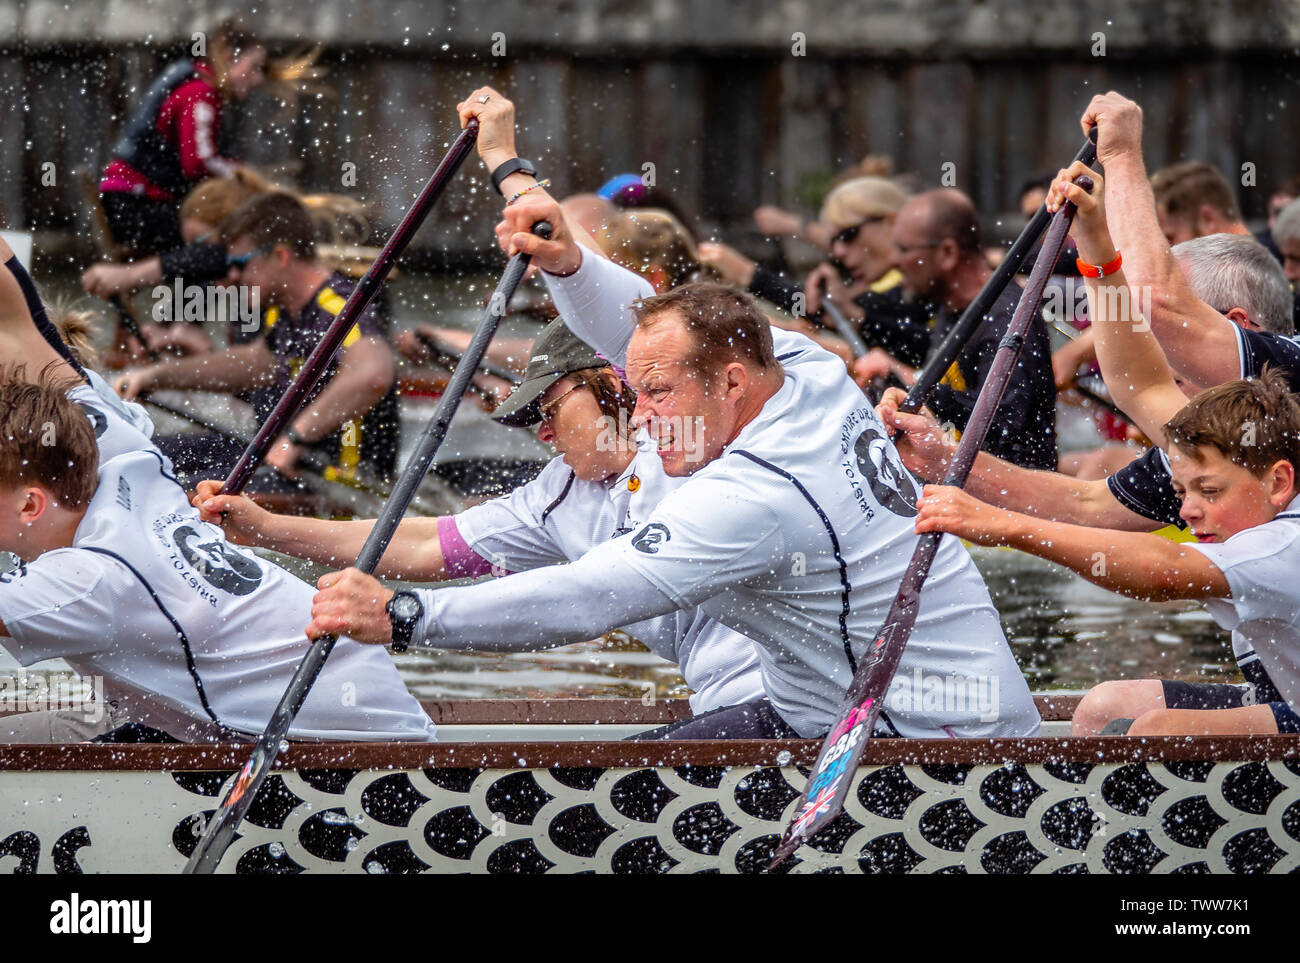 Dragon boat racing on Bristol floating harbour where teams of amateur rowers frantically paddle decorated canoes to raise money for charity Bristol UK Stock Photo